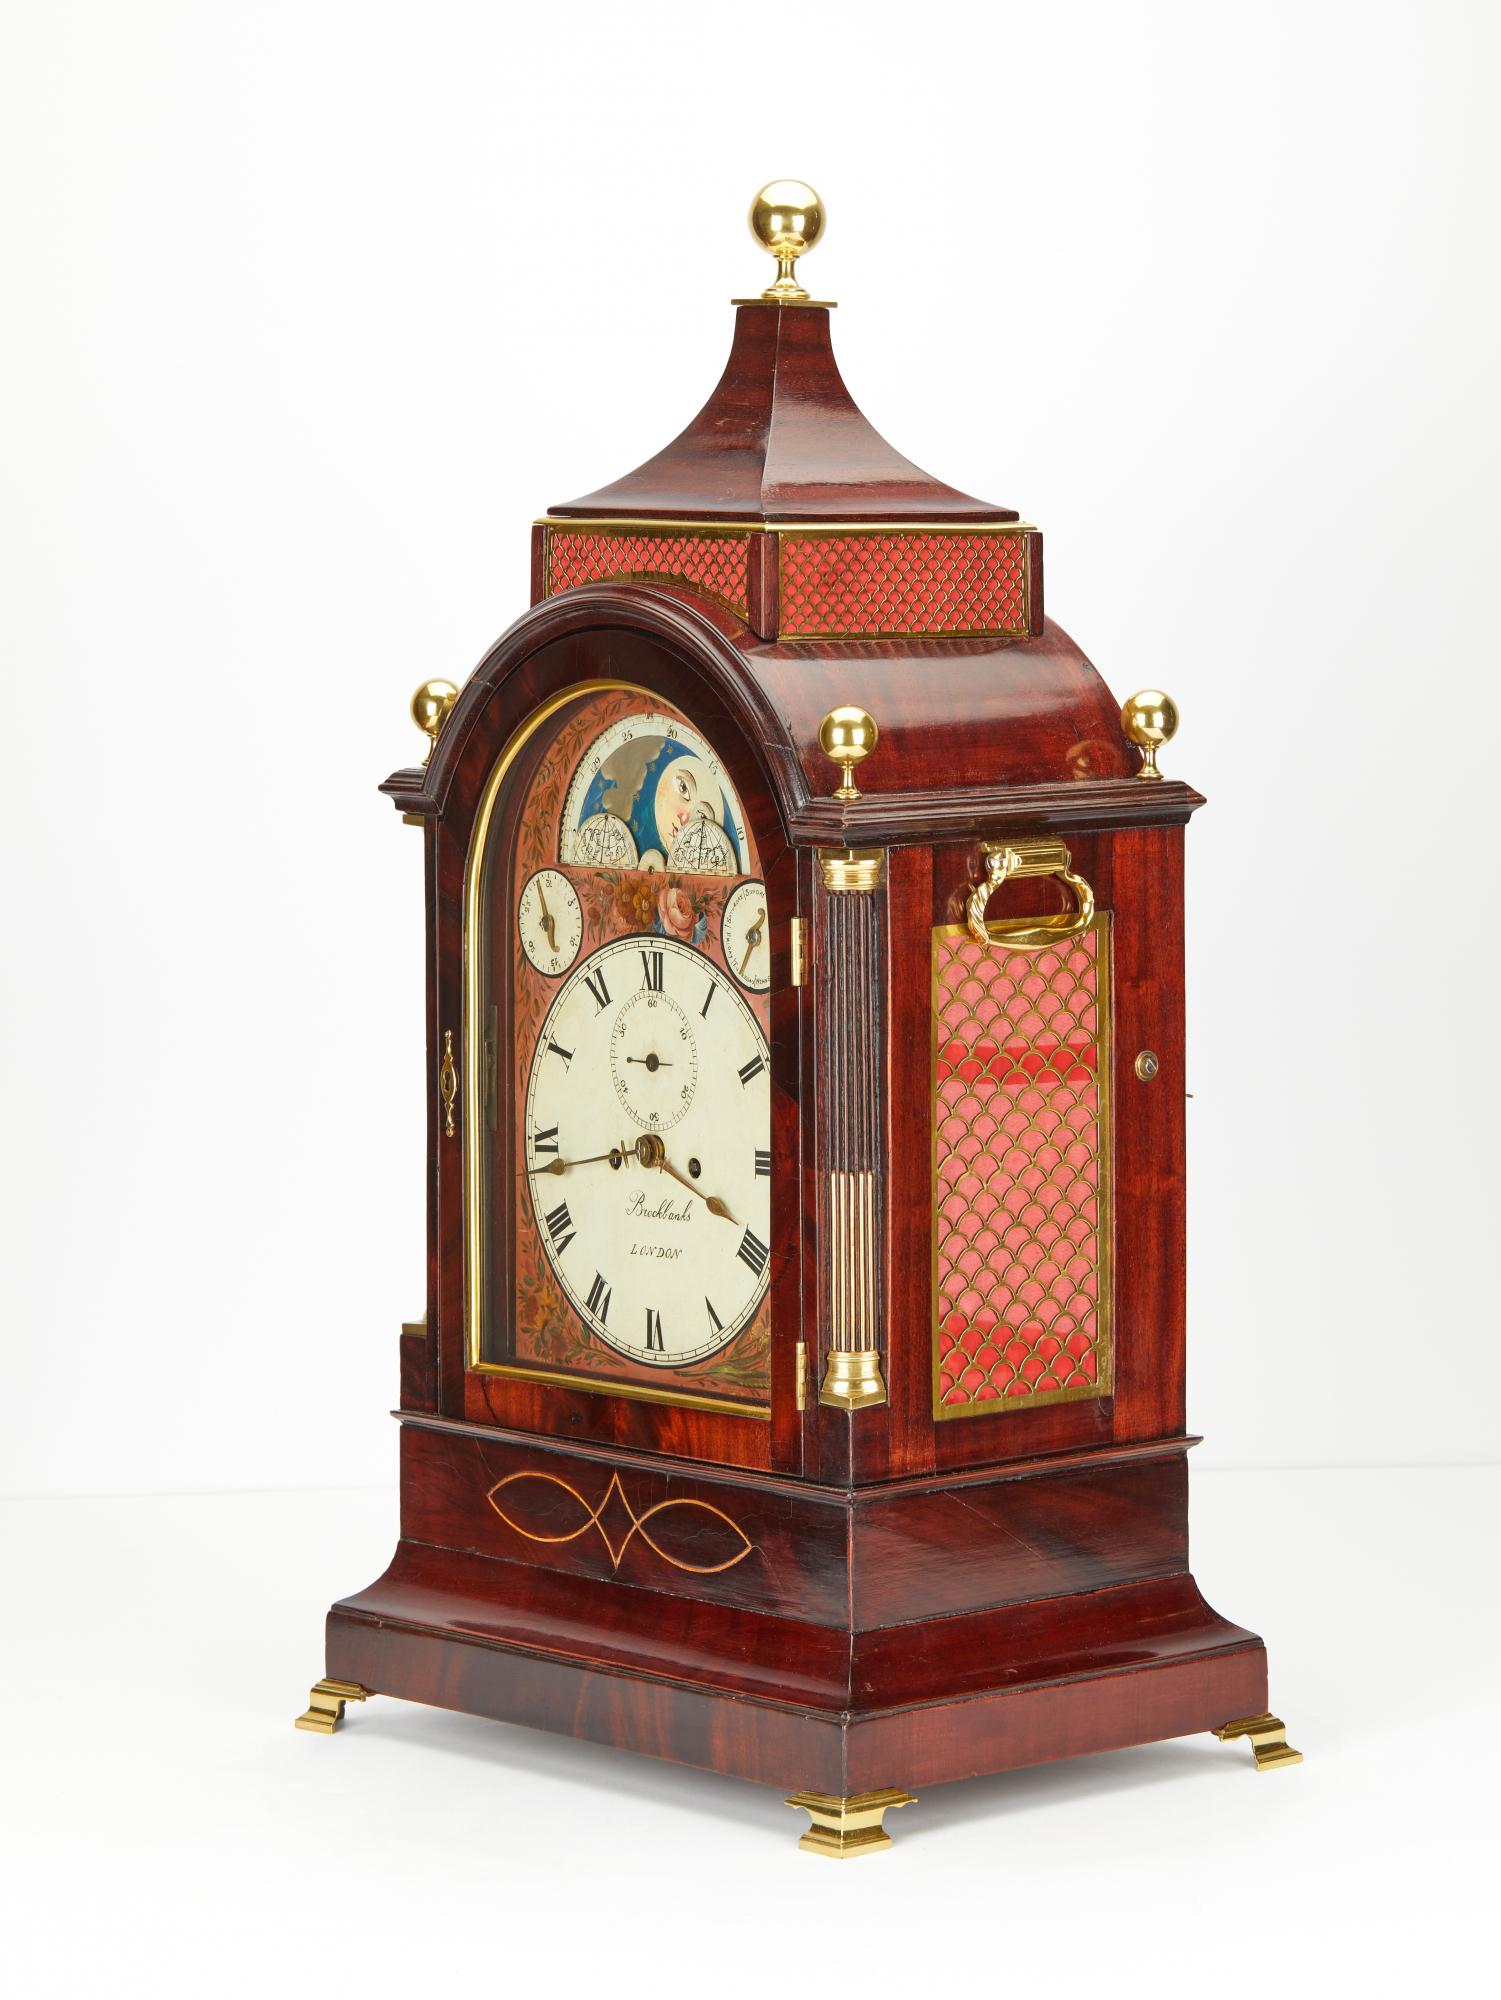 A good English mahogany bracket clock with a very nice multi color decorated painted dial. Charming Moon phase. Date numbers of the month. Special hand for indicating the days of the week.
The lovely Floral Mahogany case with pagoda top nice bronze